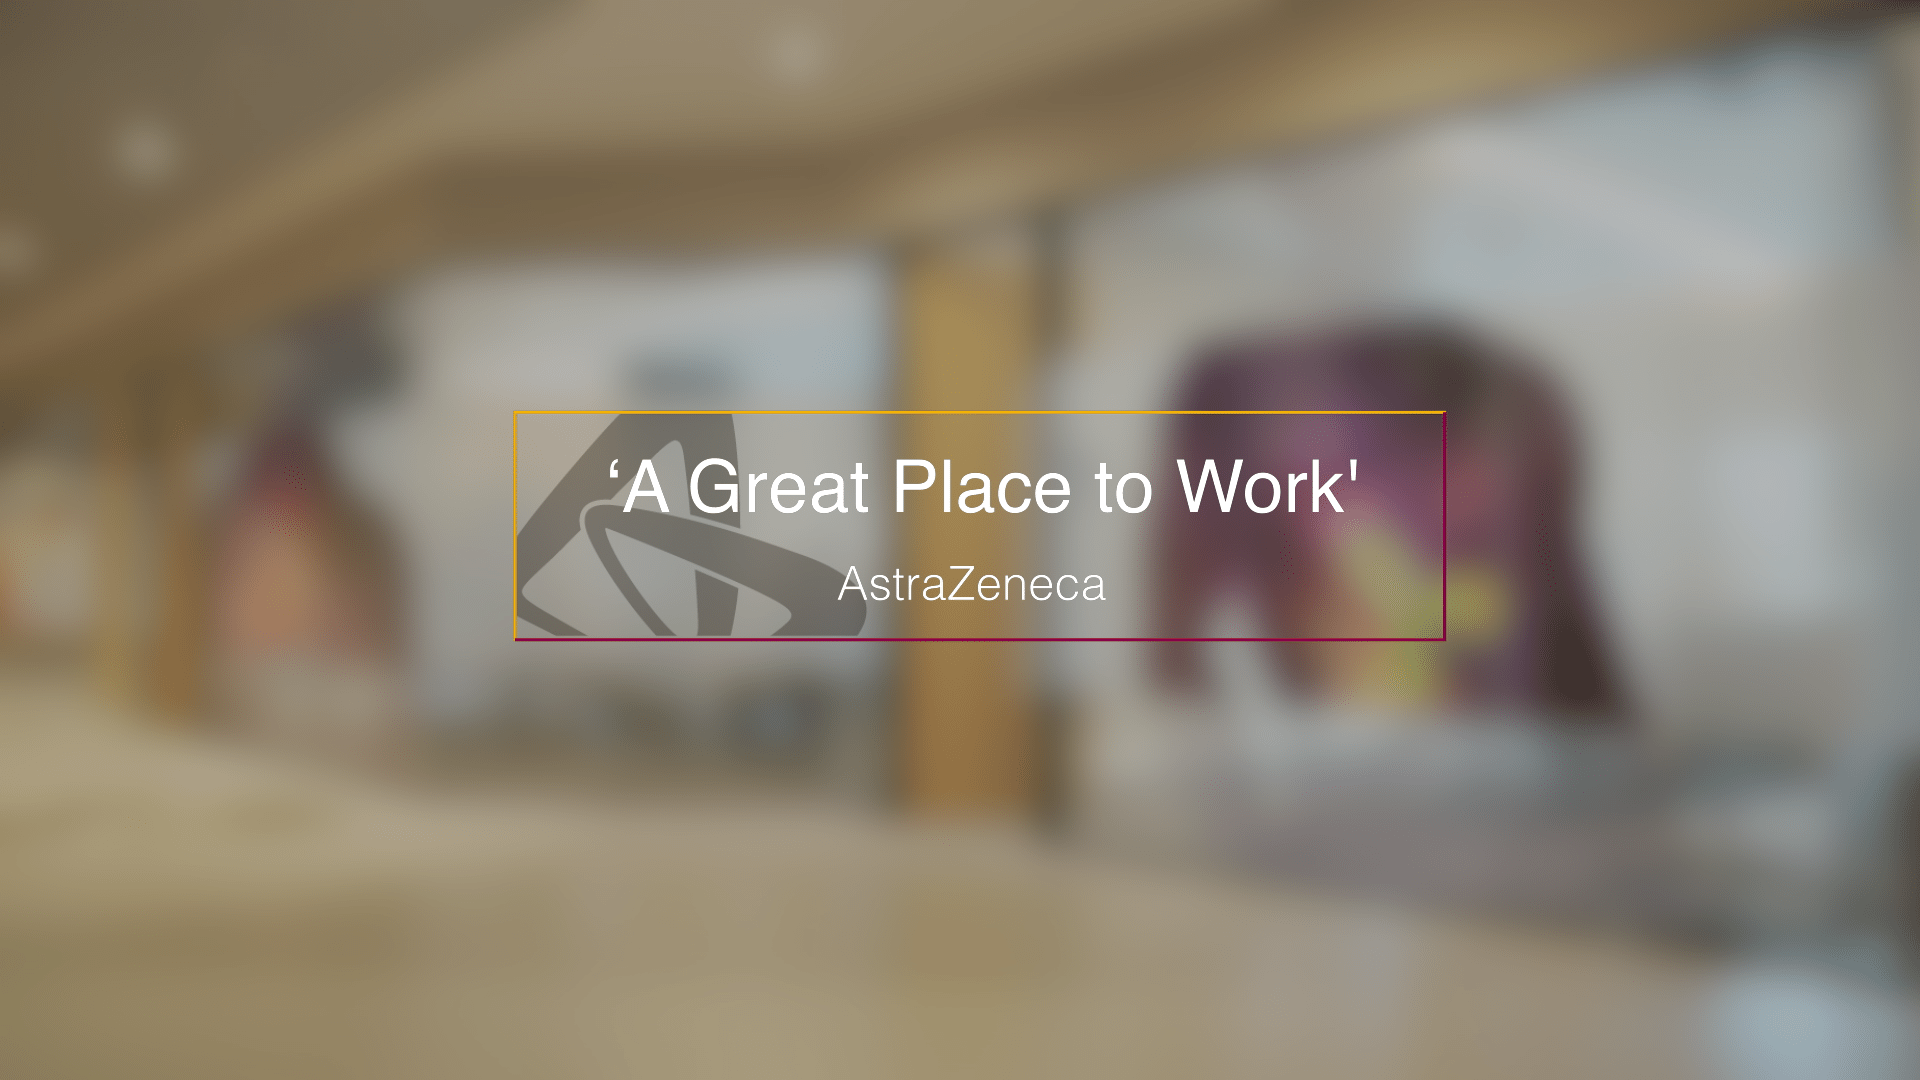 Astra Zeneca - A great Place to Work